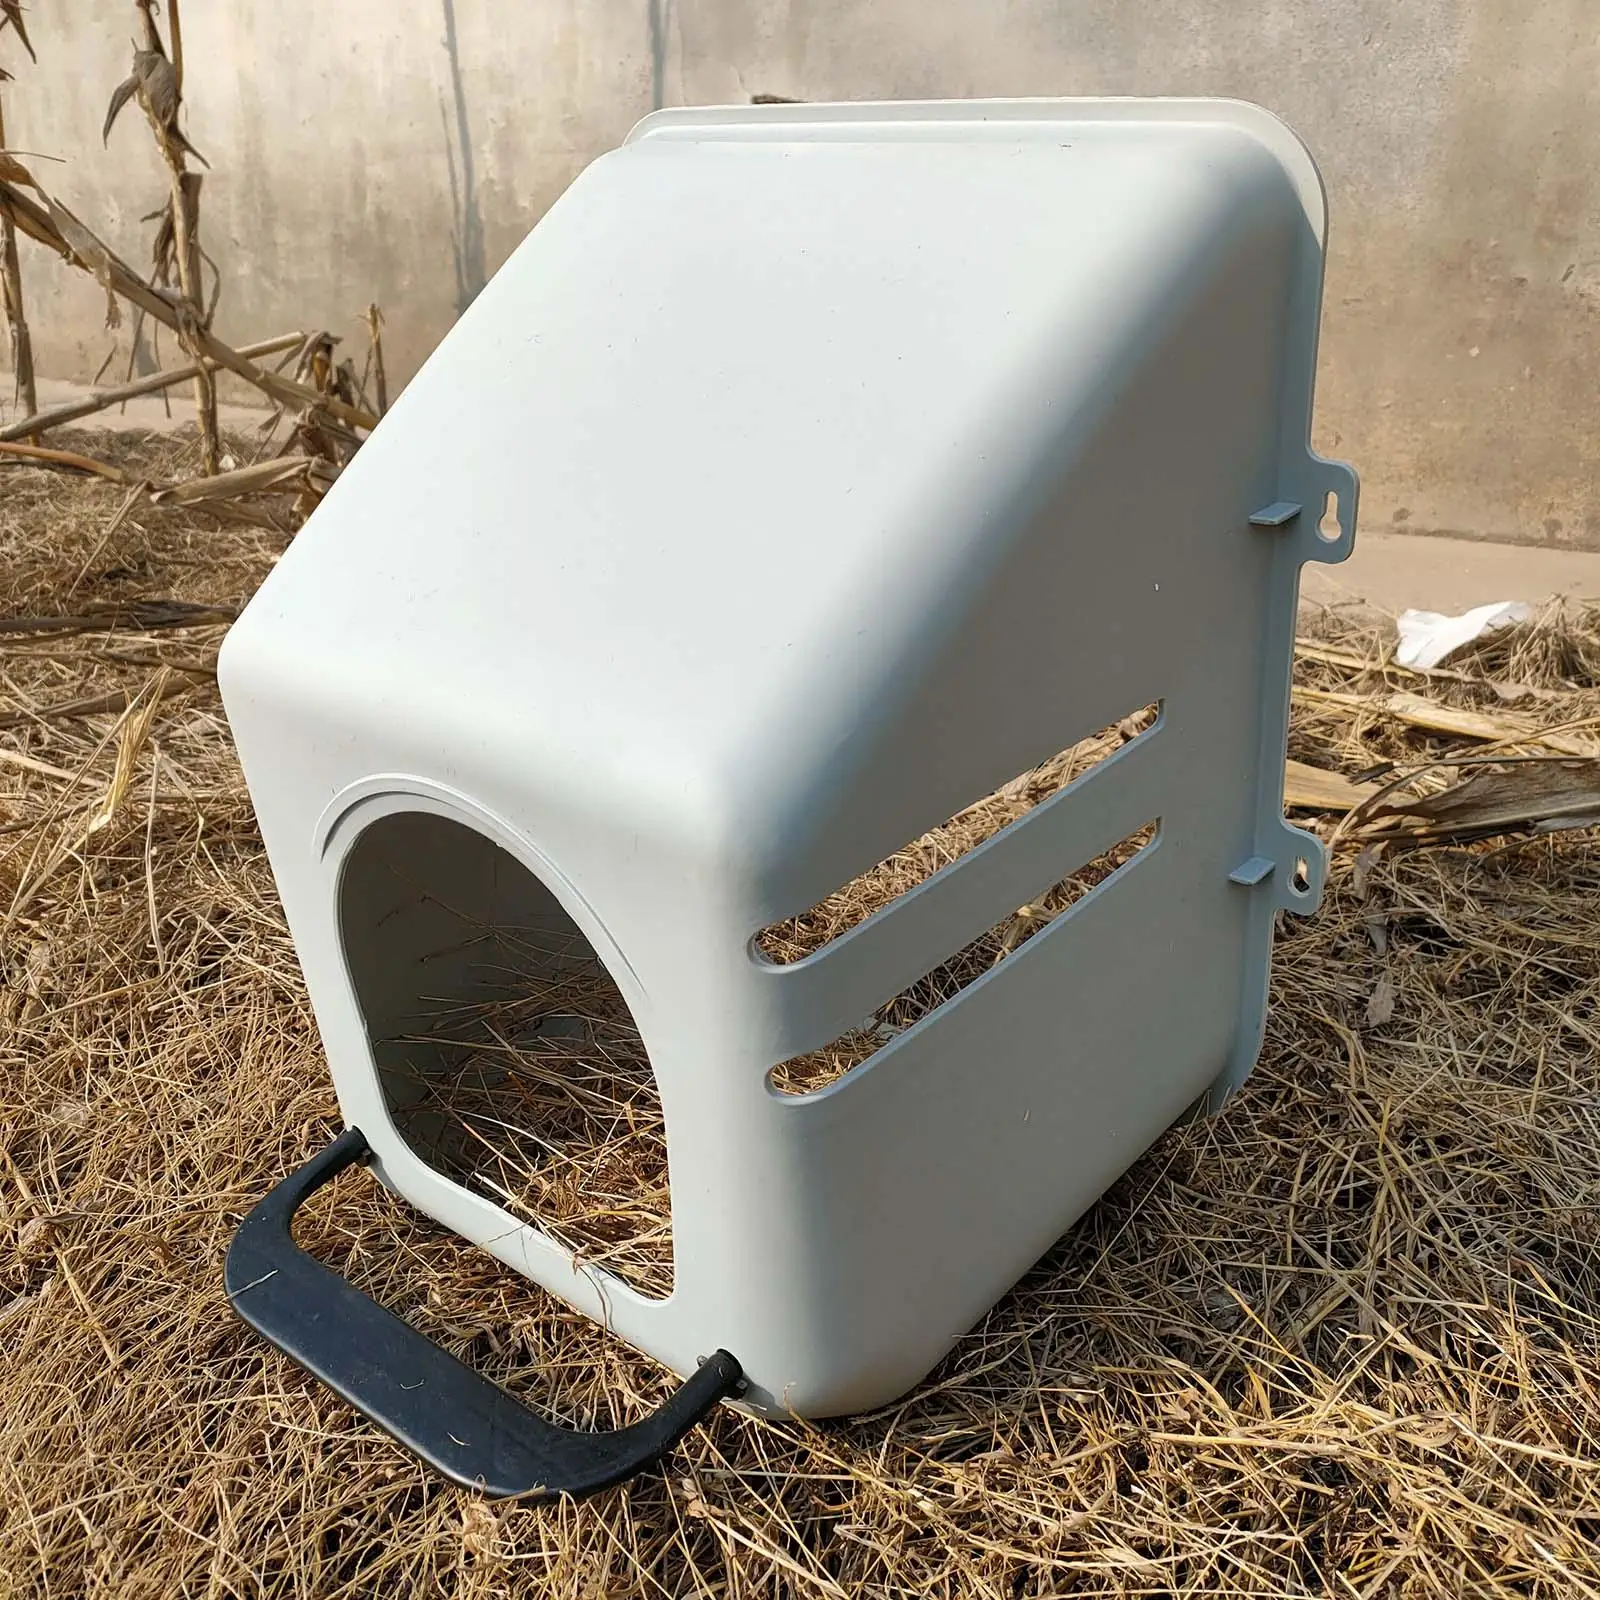 Hen Egg Laying Nest Boxes Sturdy Durable Chicken Laying Box Heavy Duty Nest Box for Duck Laying Eggs Farm Poultry Accs